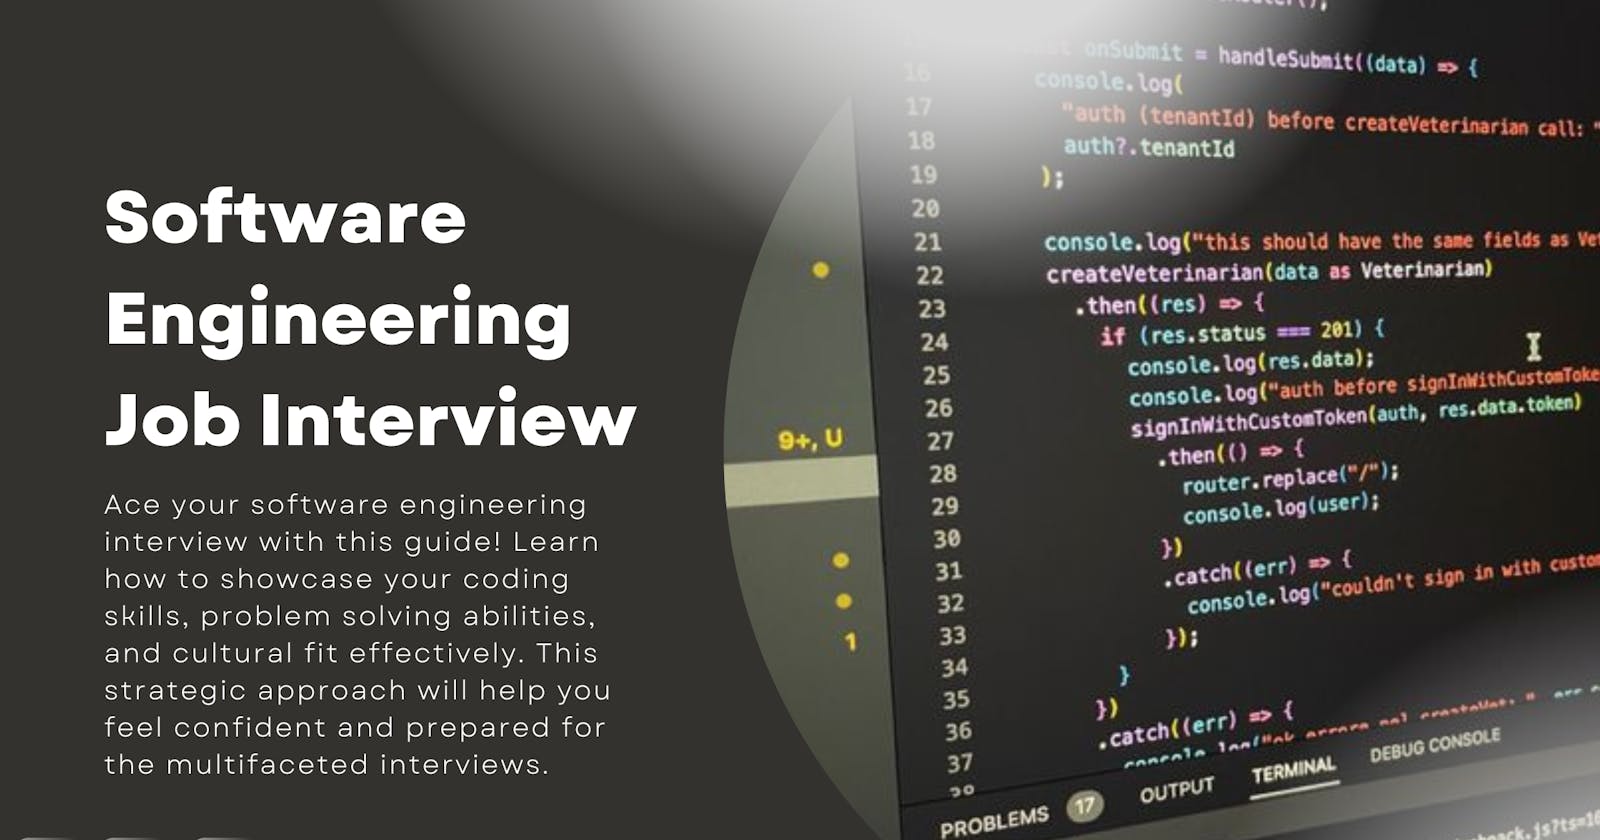 How do I prepare for a software engineering job interview?